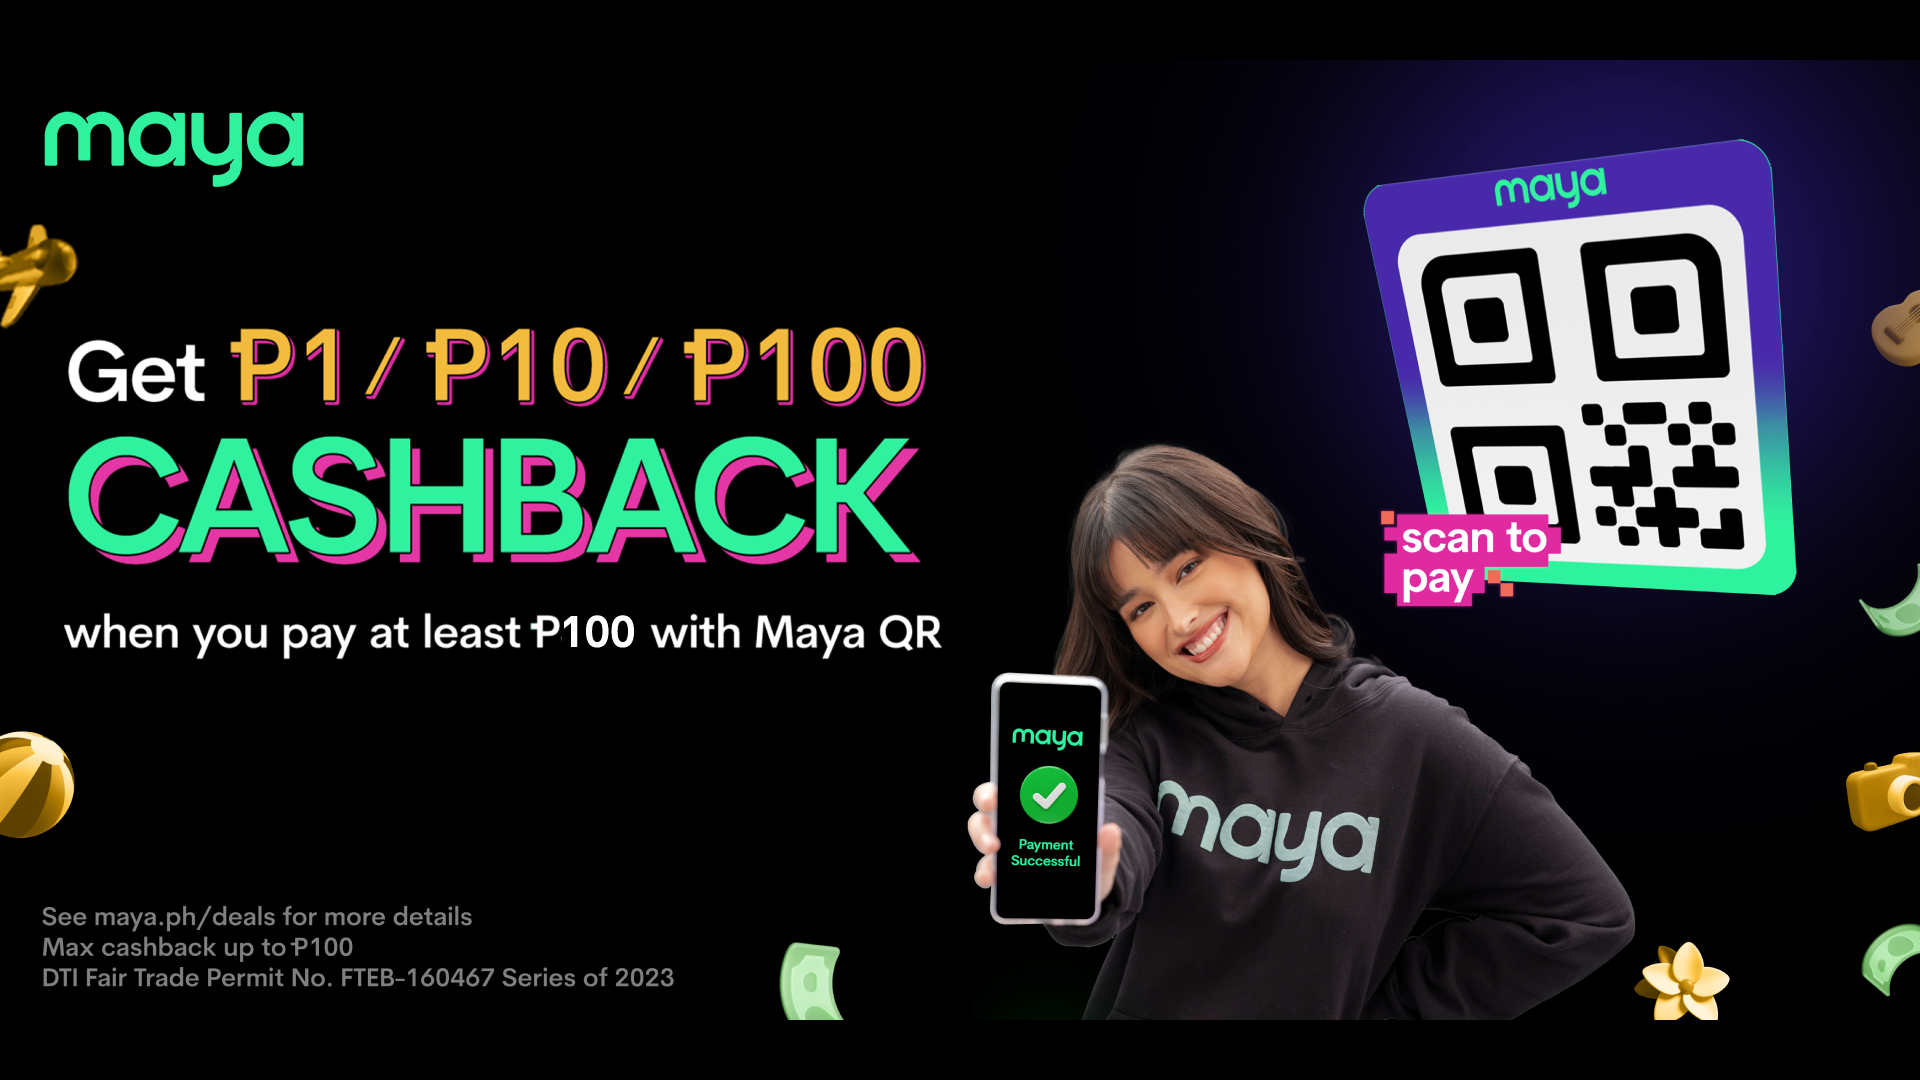 Enjoy up to ₱100 cashback when you pay with QR